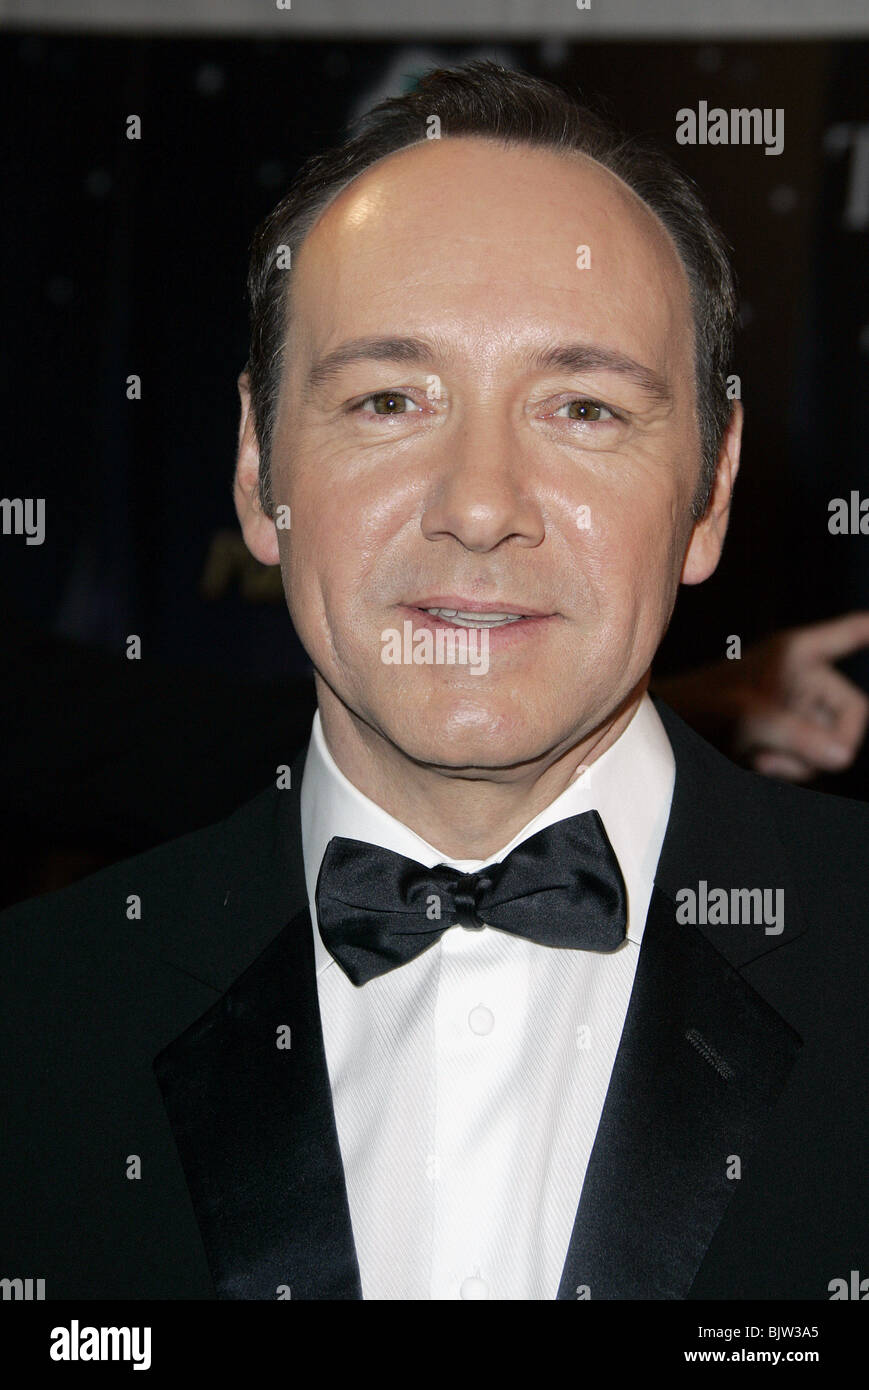 KEVIN SPACEY 16TH PALM SPRINGS INTERNATIONA CONVENTION CENTER PALM SPRINGS USA 09 Gennaio 2005 Foto Stock